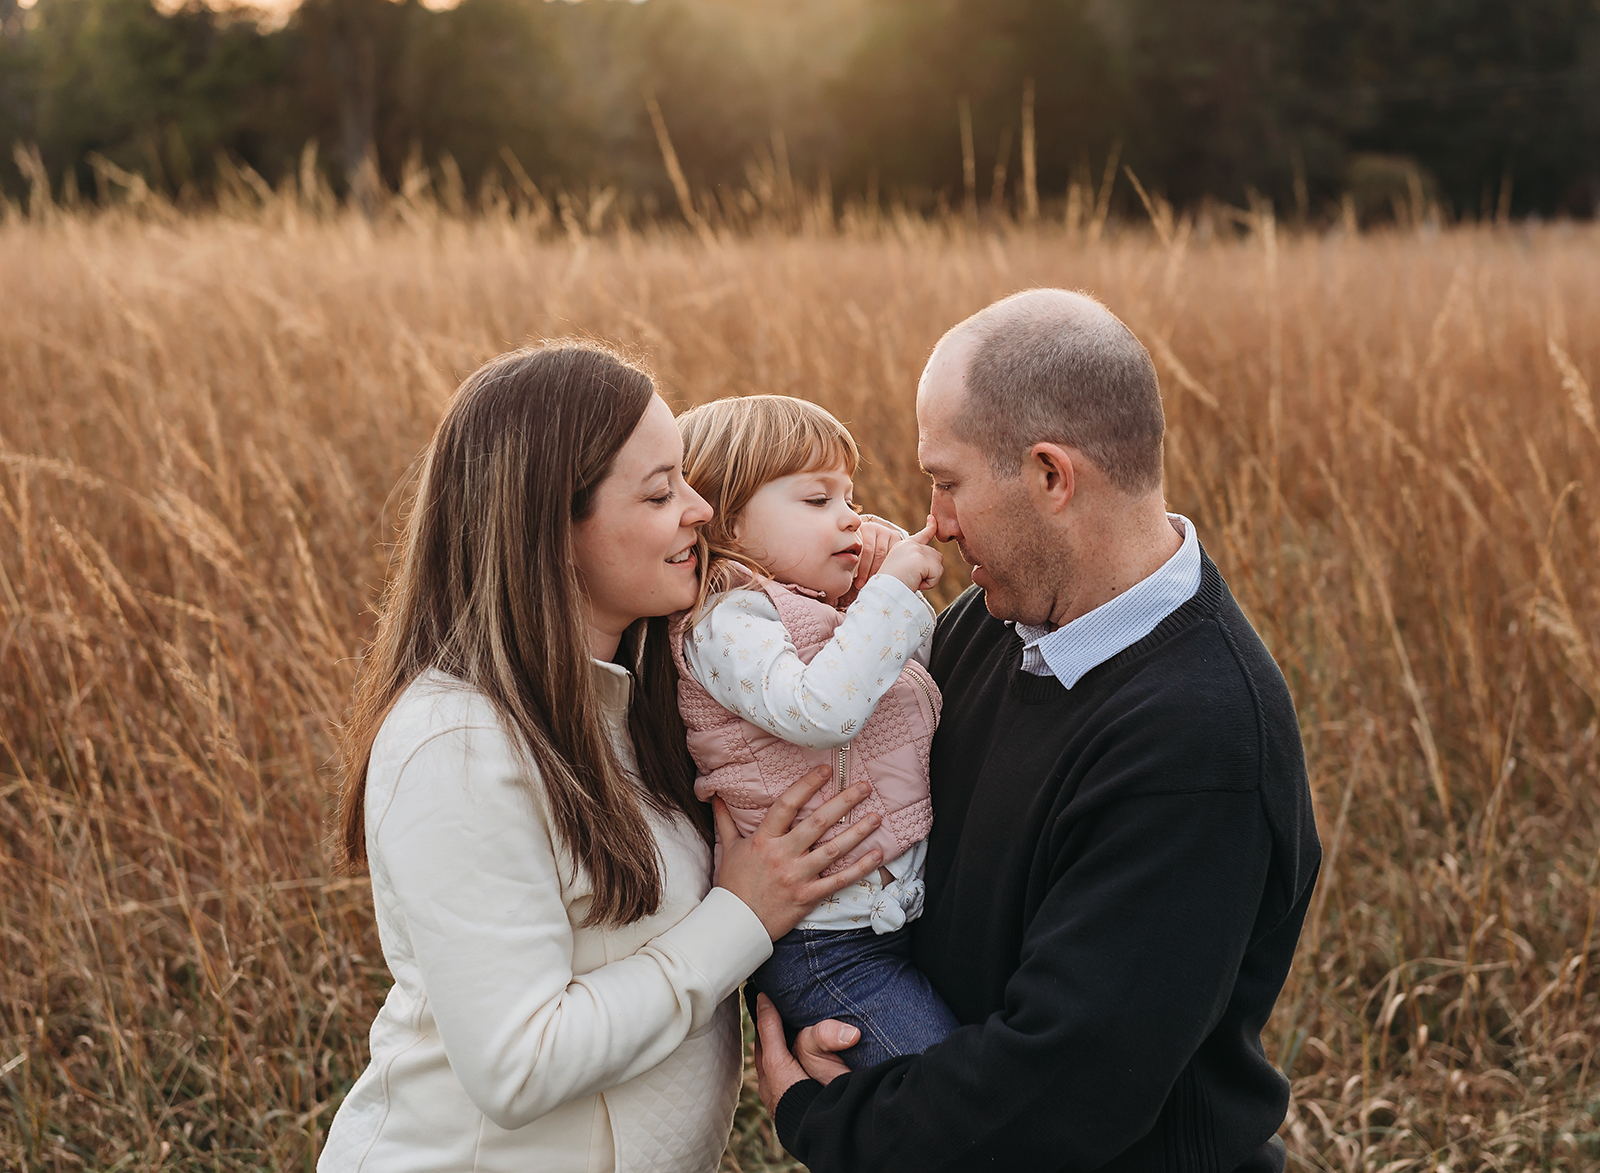 Northern VA family photographer of family having fun in a field